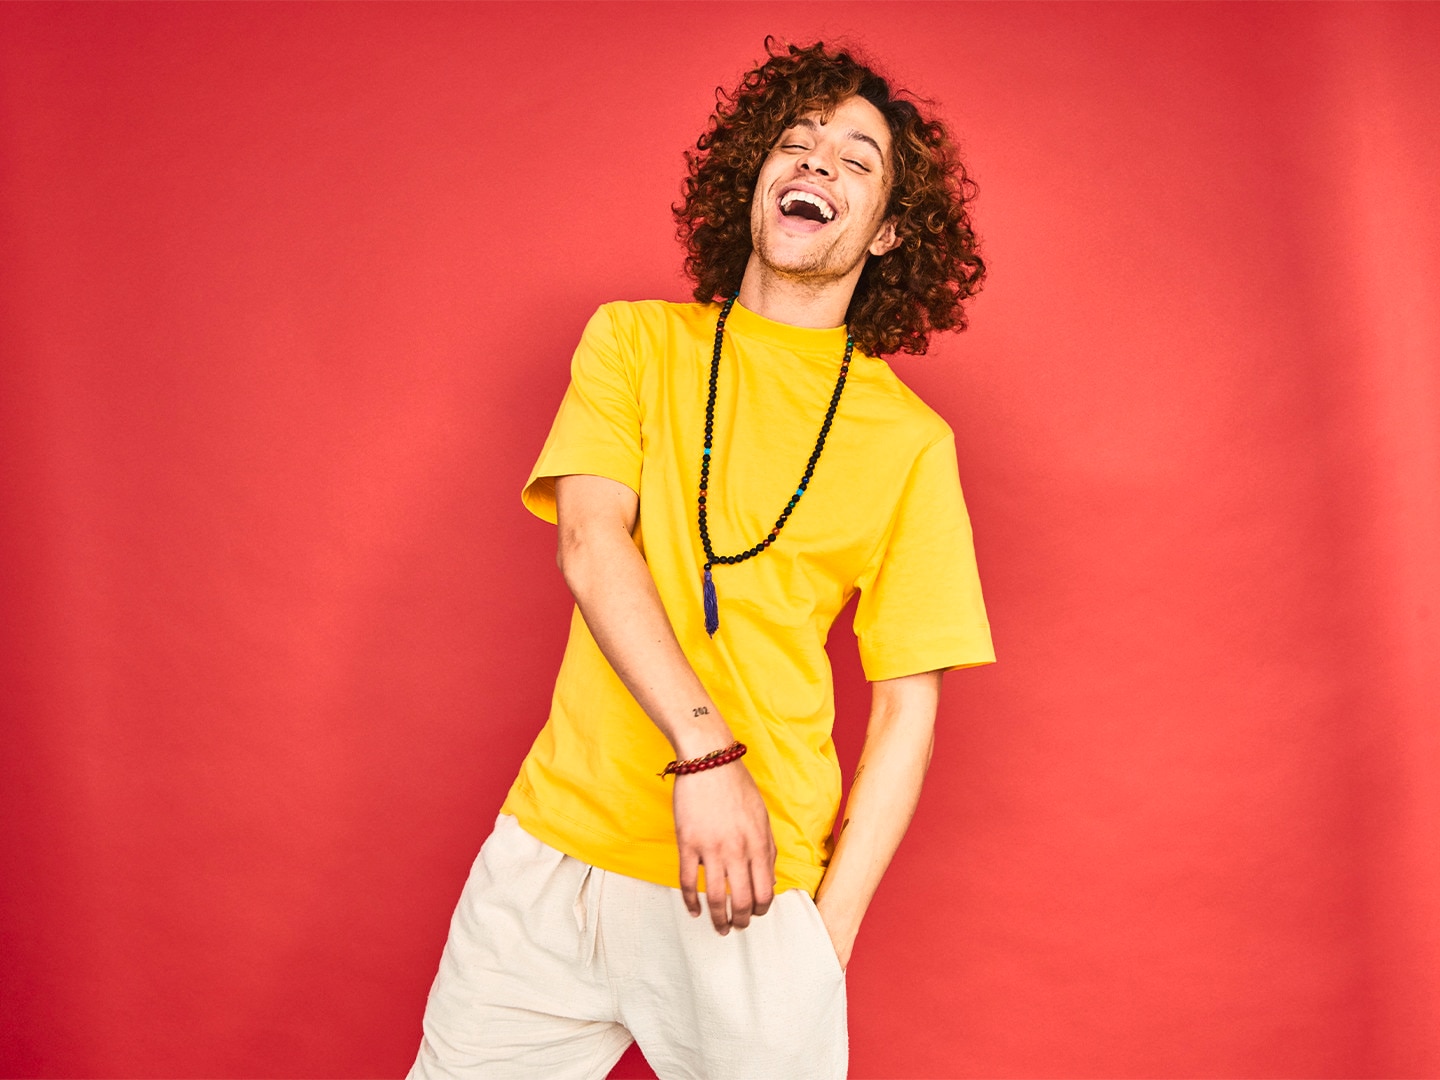 Guy in yellow shirt laughing against red backdrop